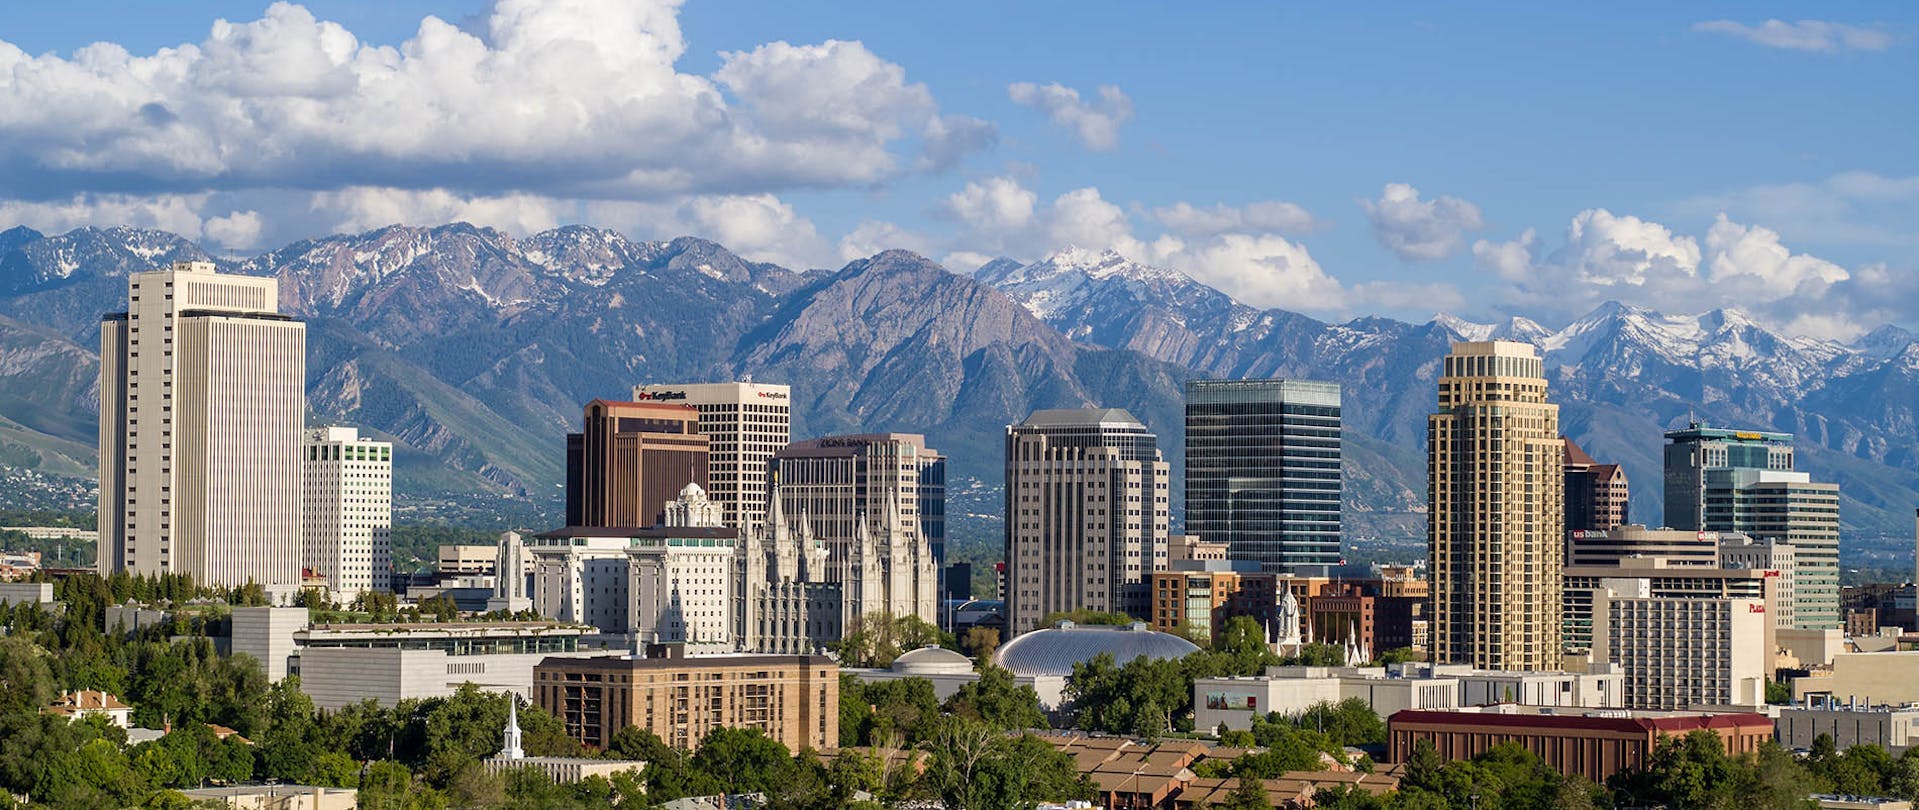 Are Denver’s Water Quality Standards a Mile High?